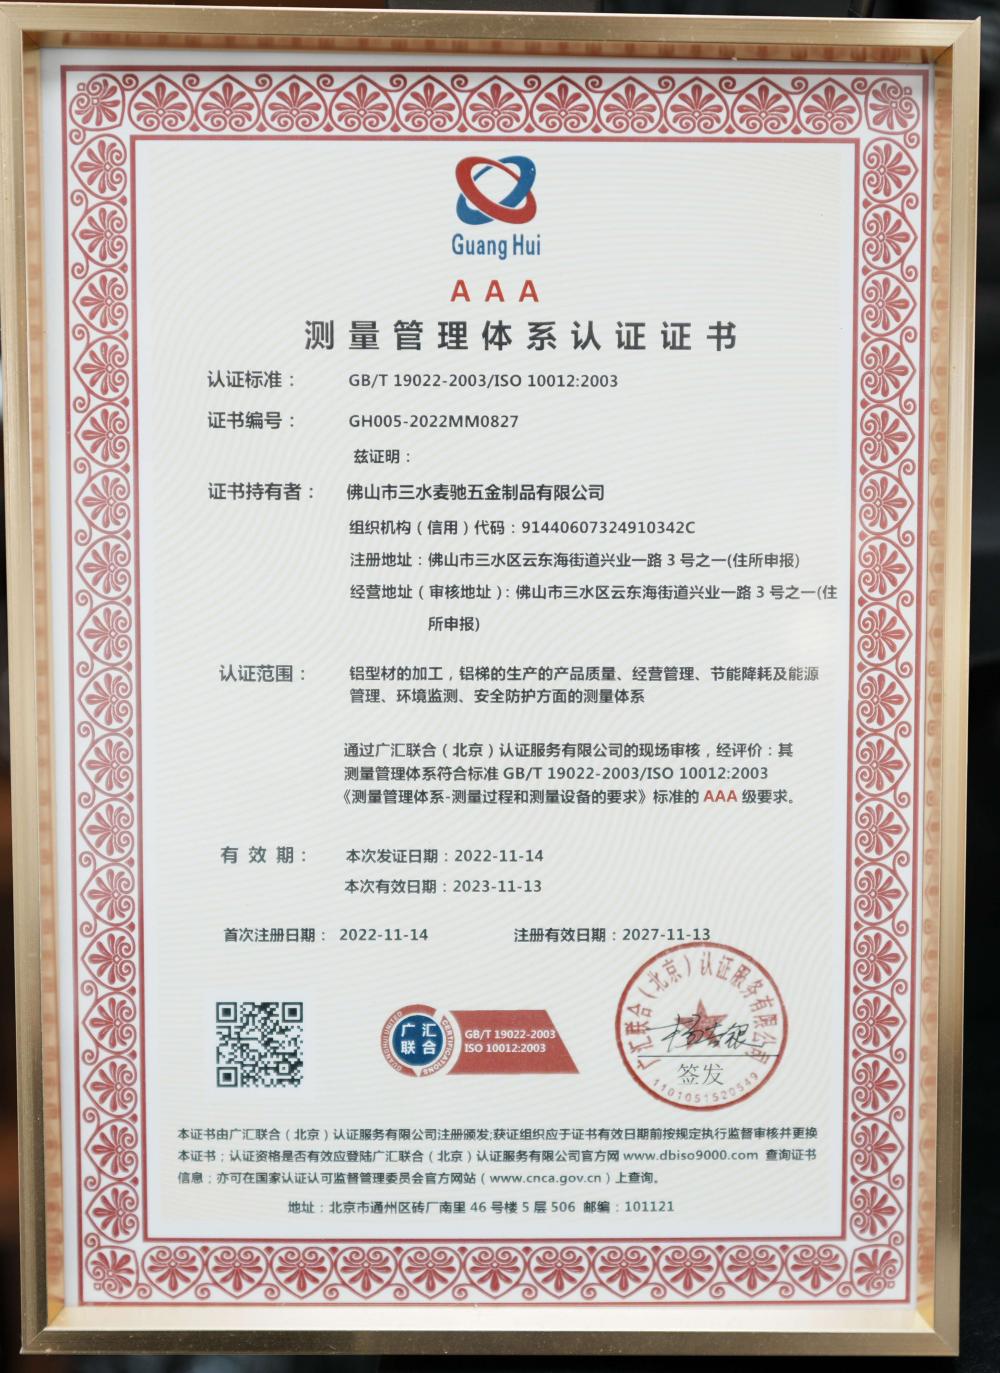 QUALITY MANAGEMENT SYSTEM CERTIFIFCATE  ---GB/T 19022-2003/ISO 10012:2003